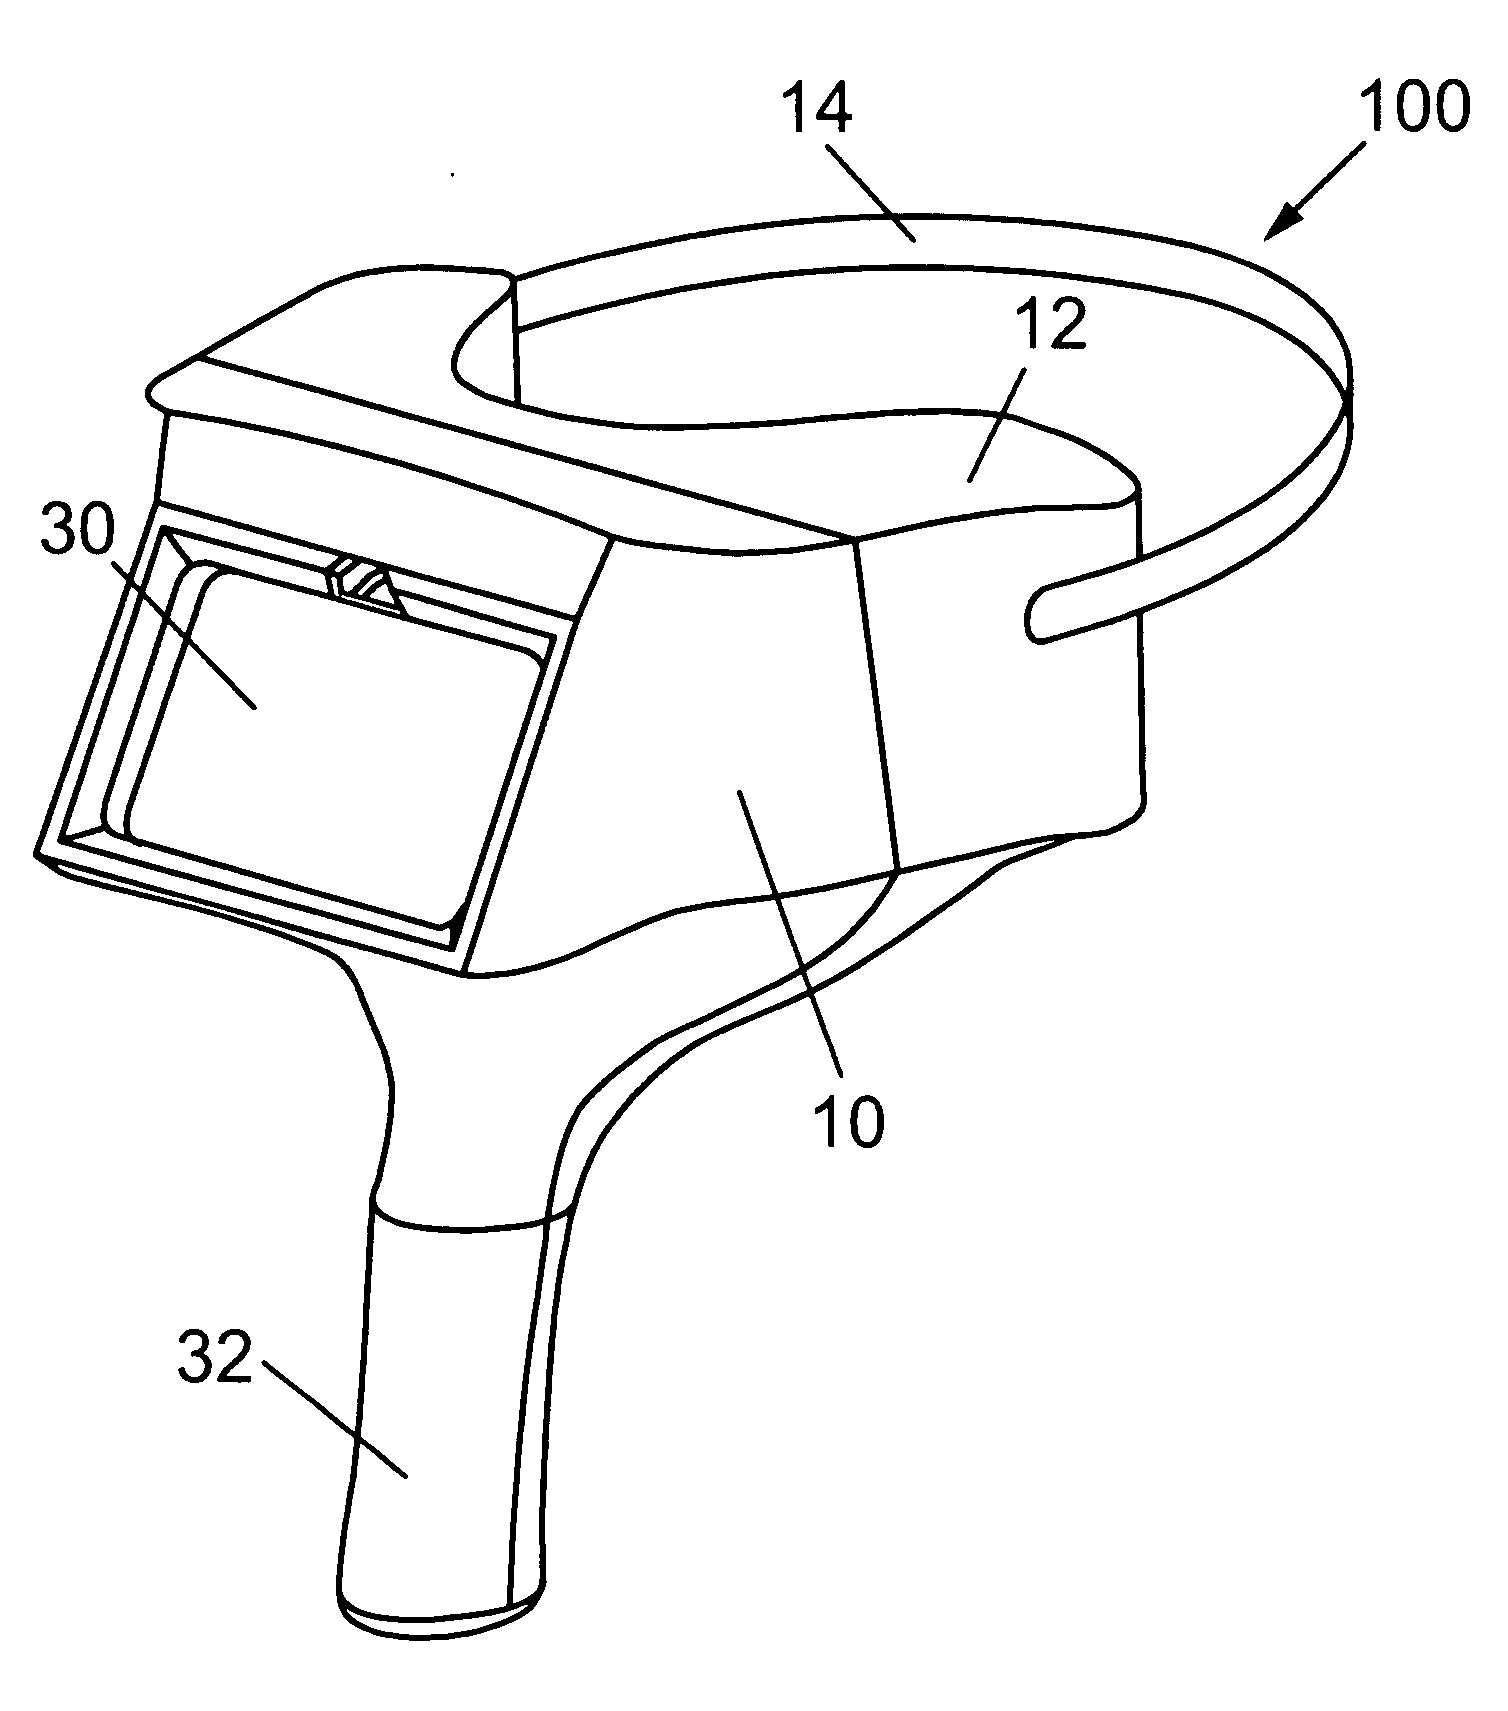 Orofacial radiation detection device for detection of radionuclide contamination from inhalation